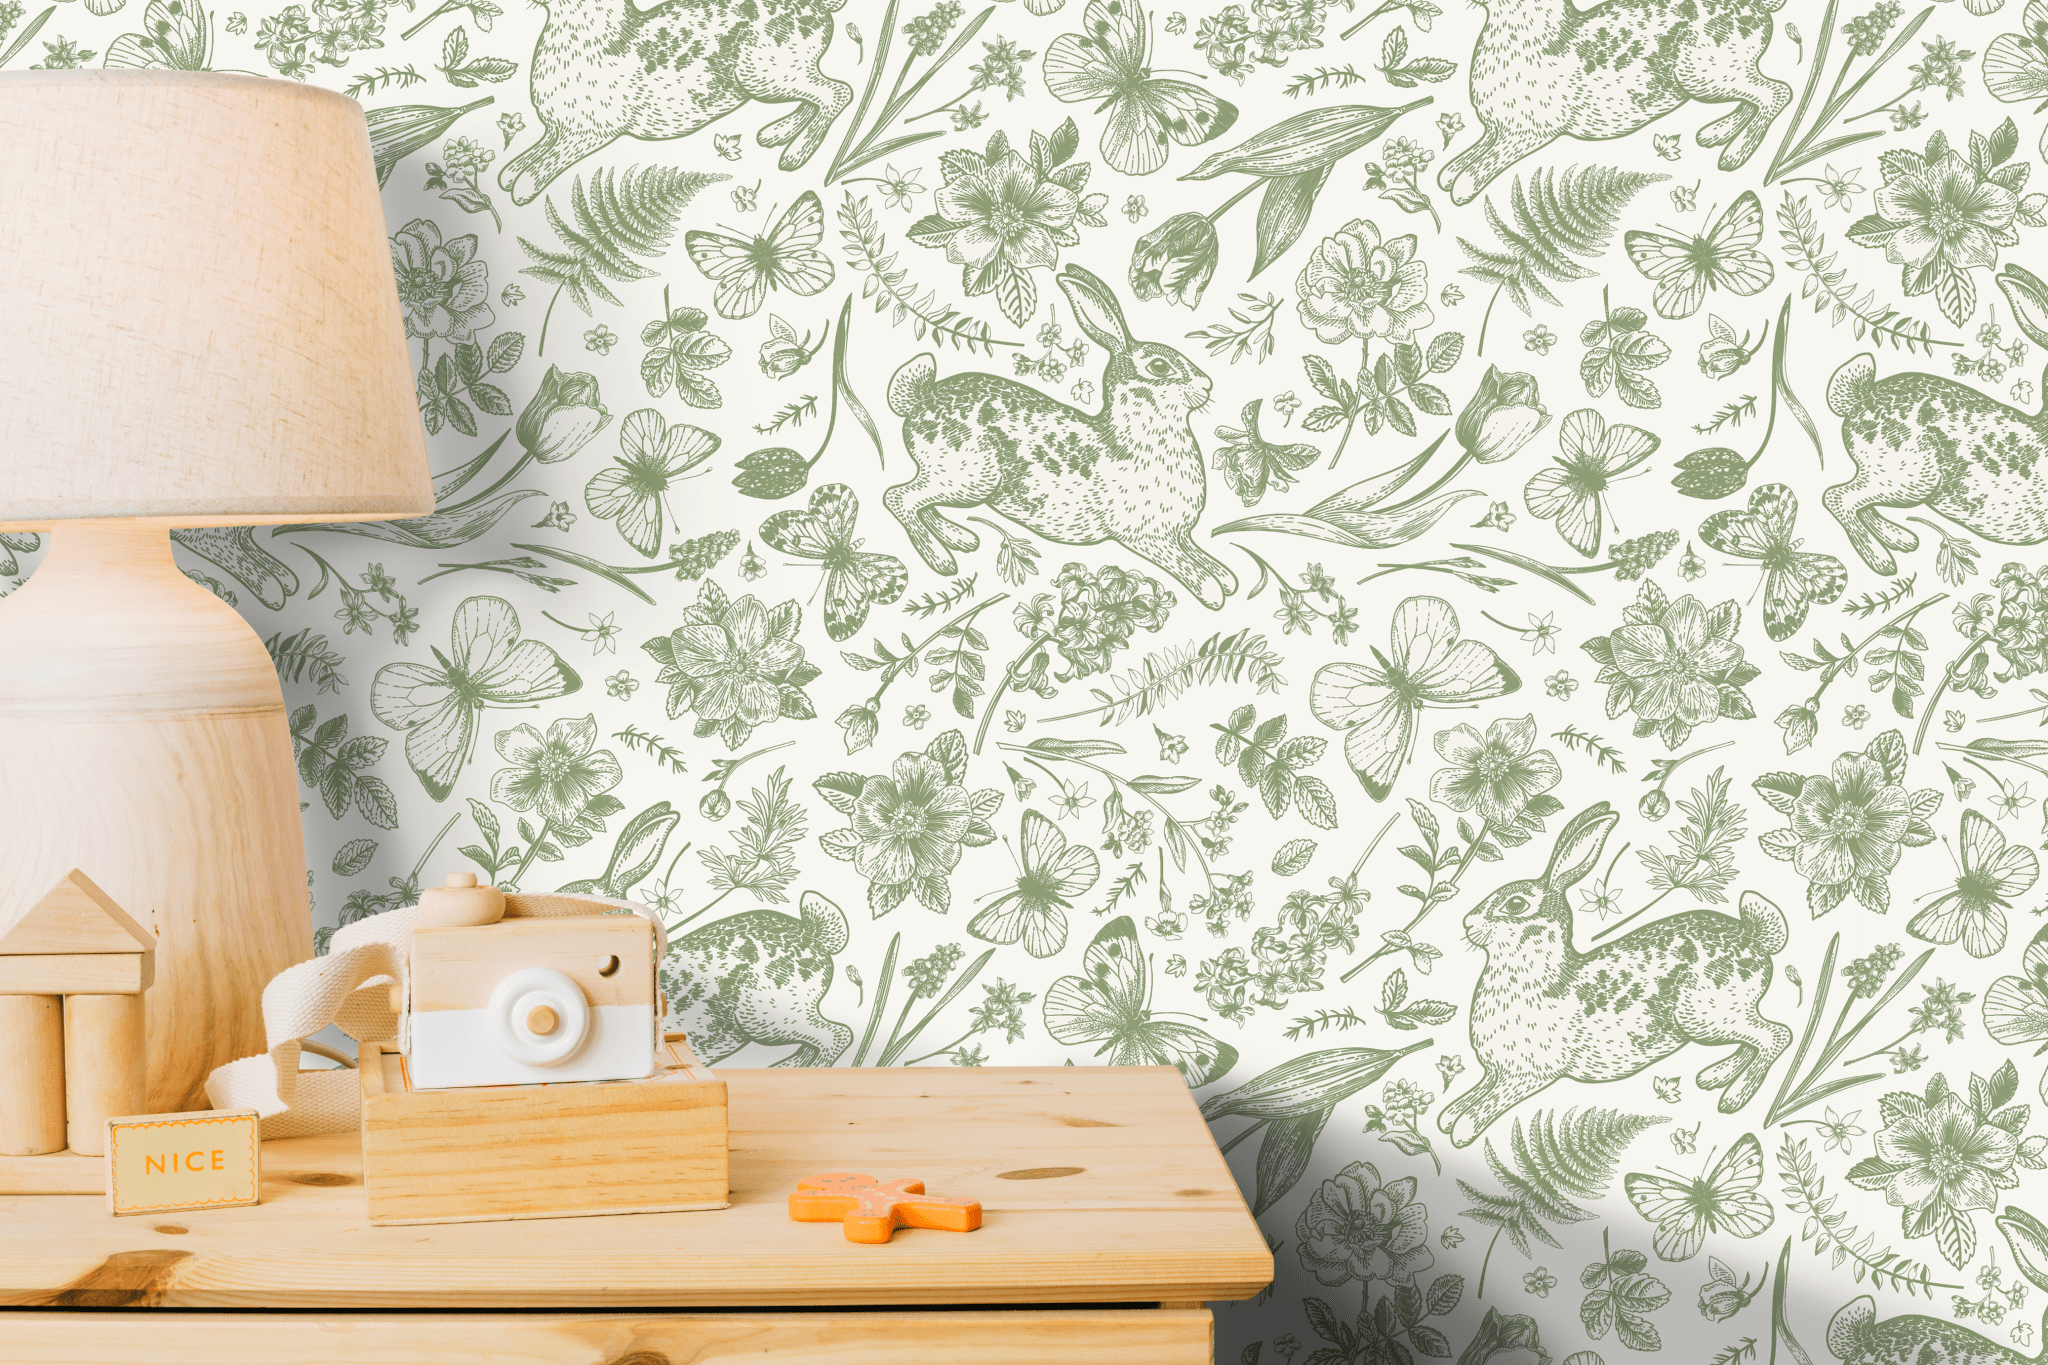 Sustainable and vibrant green peel and stick wallpaper with a botanical garden theme, displaying rabbits and butterflies amidst an array of ferns and clover, ideal for an eco-friendly home decor update